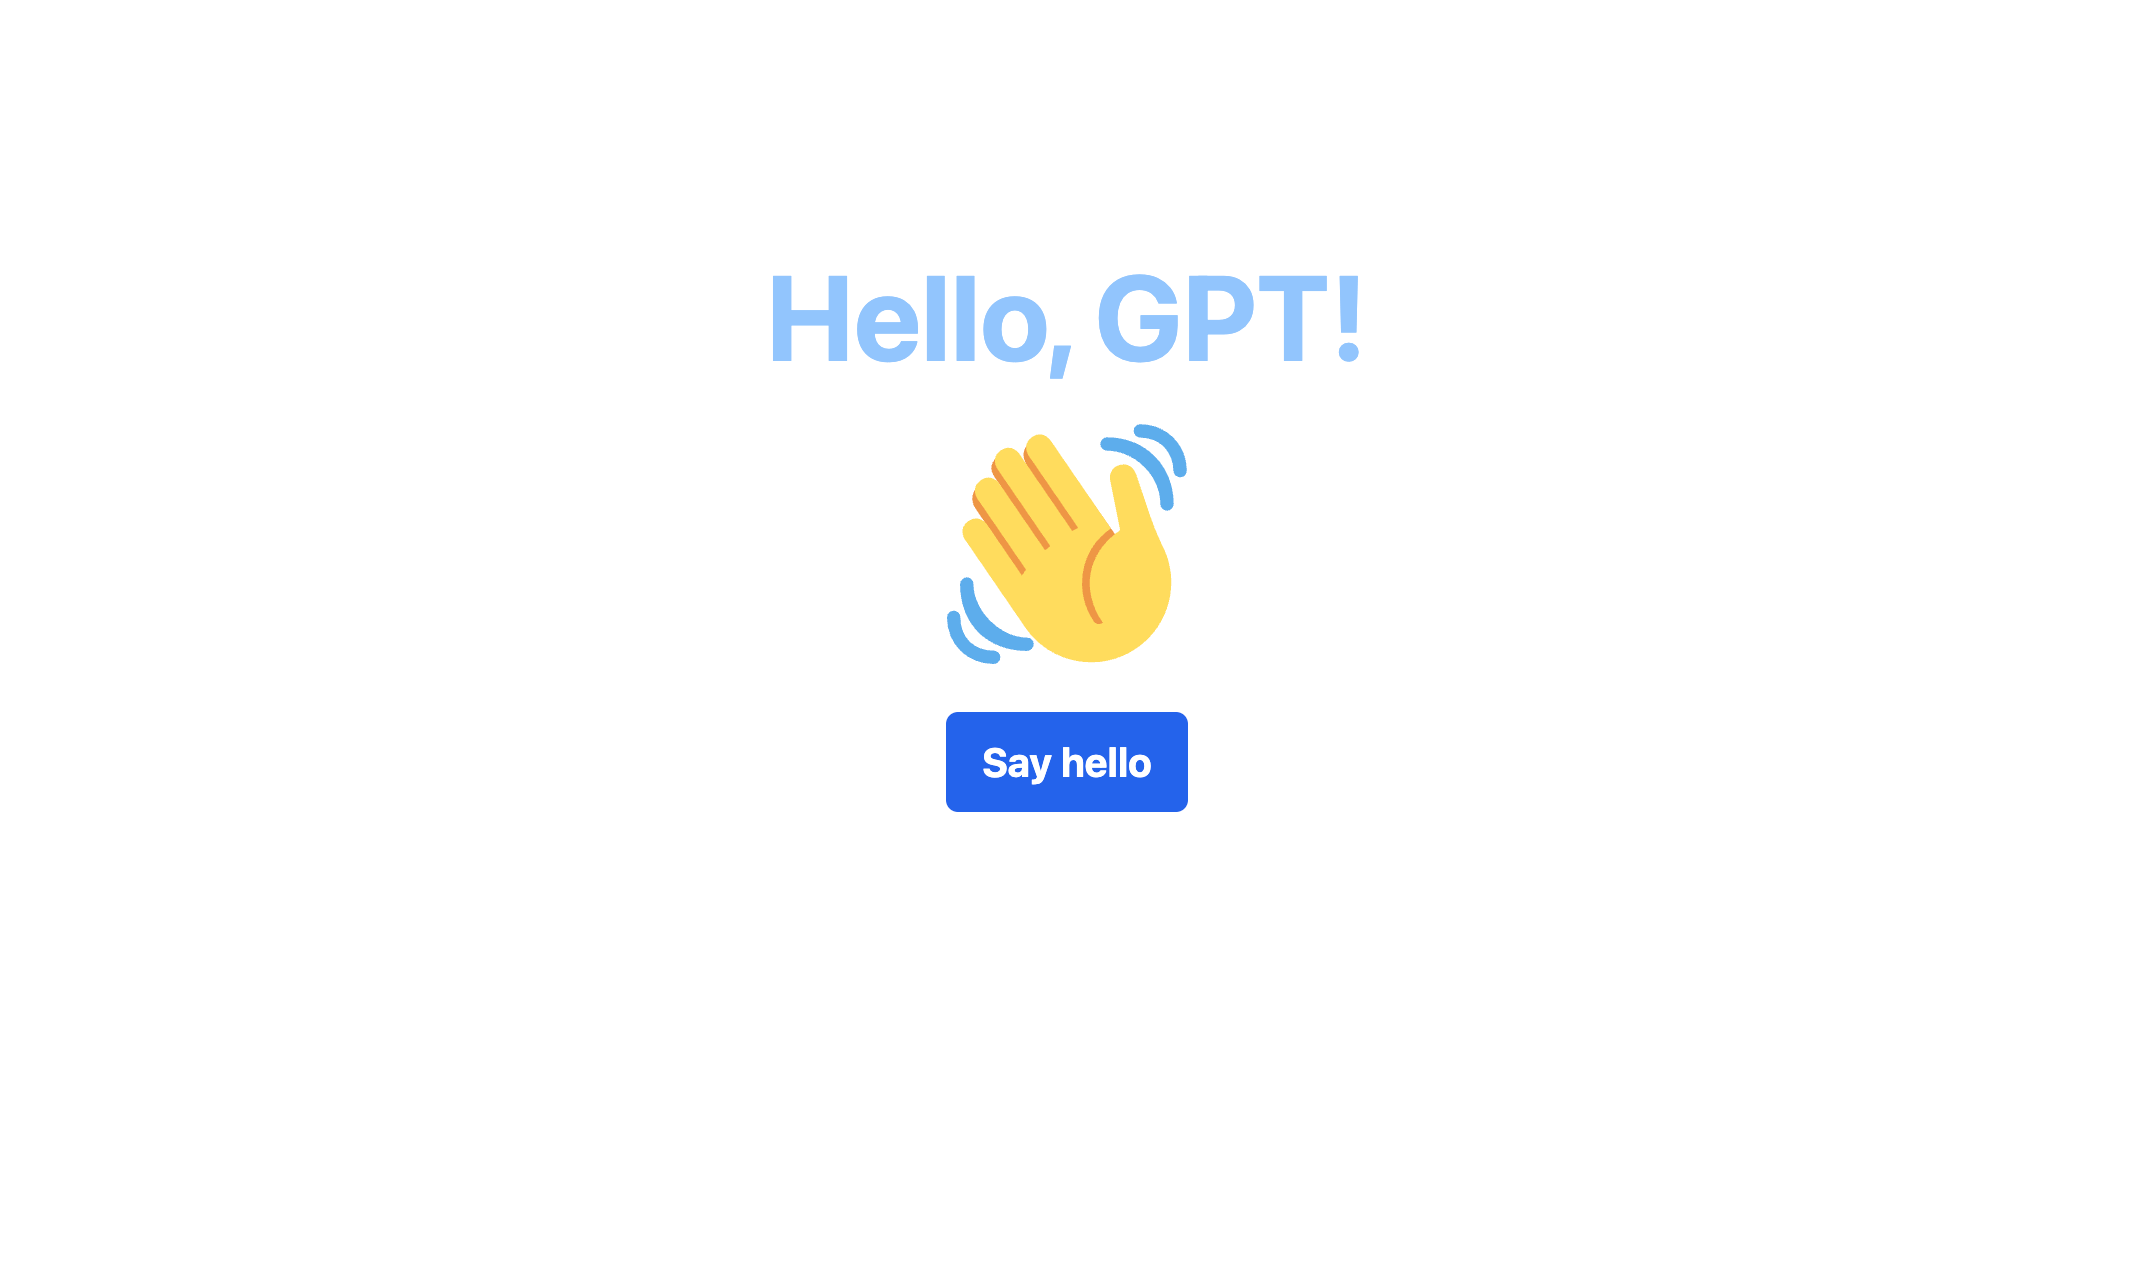 "Hello, GPT!": The UI of our web app on initial load.